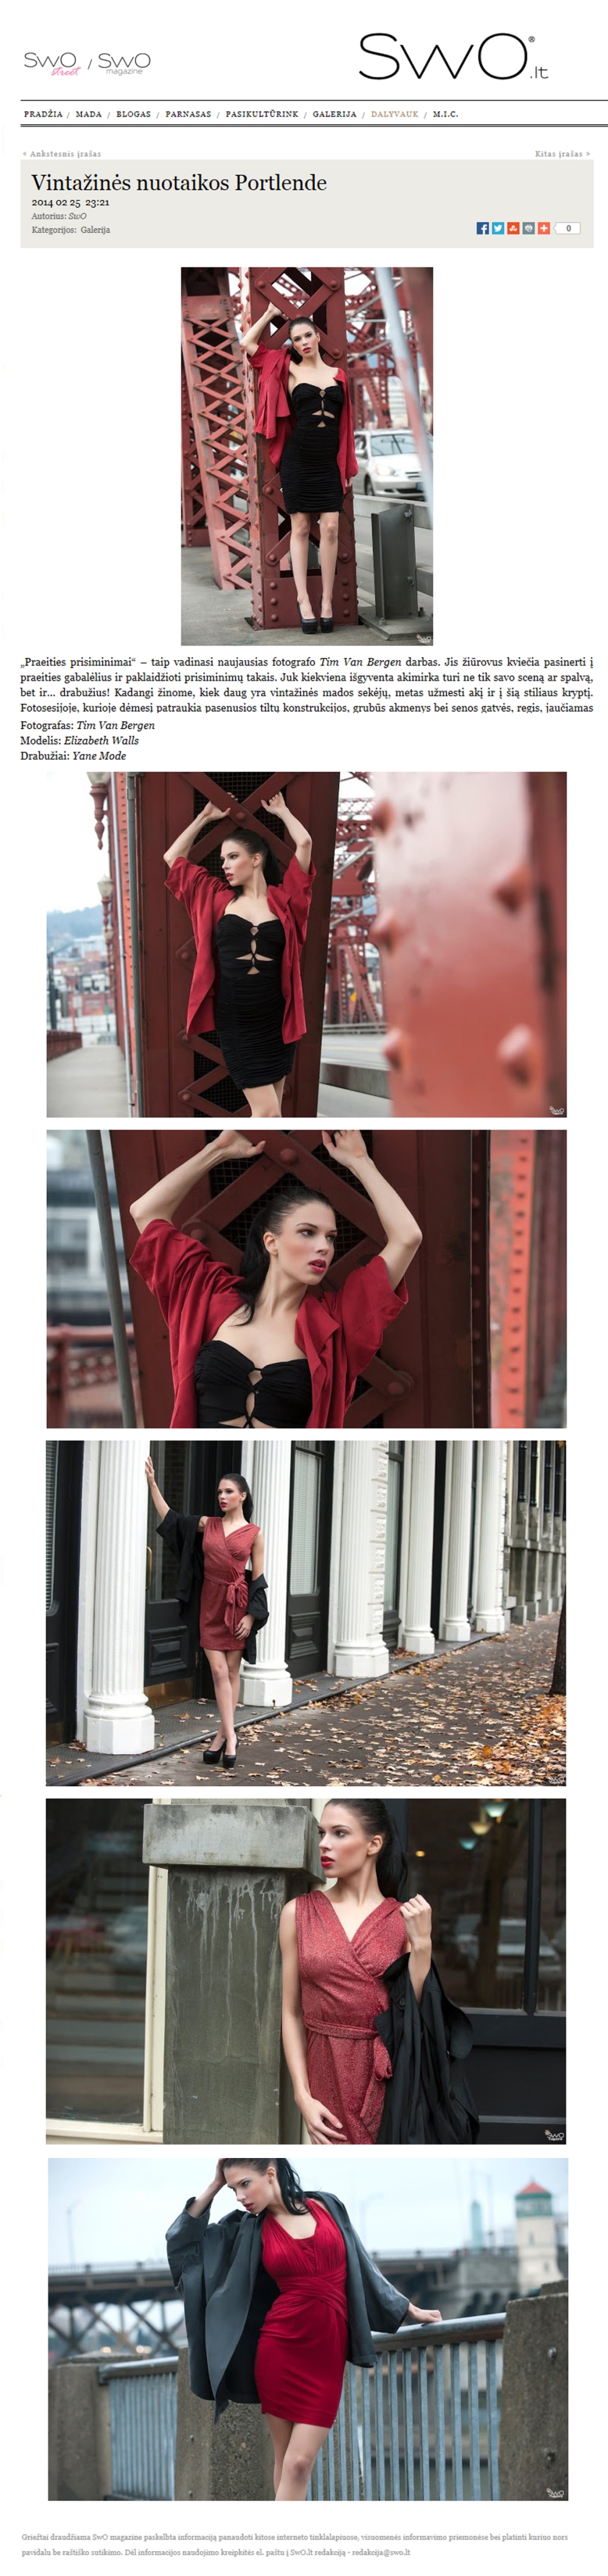 YANE MODE featured in SwO magazine Lithuania leading magazine in UK and Europe of our lastest editorial Vintažinės nuotaikos Portlende Vintage mood Portland